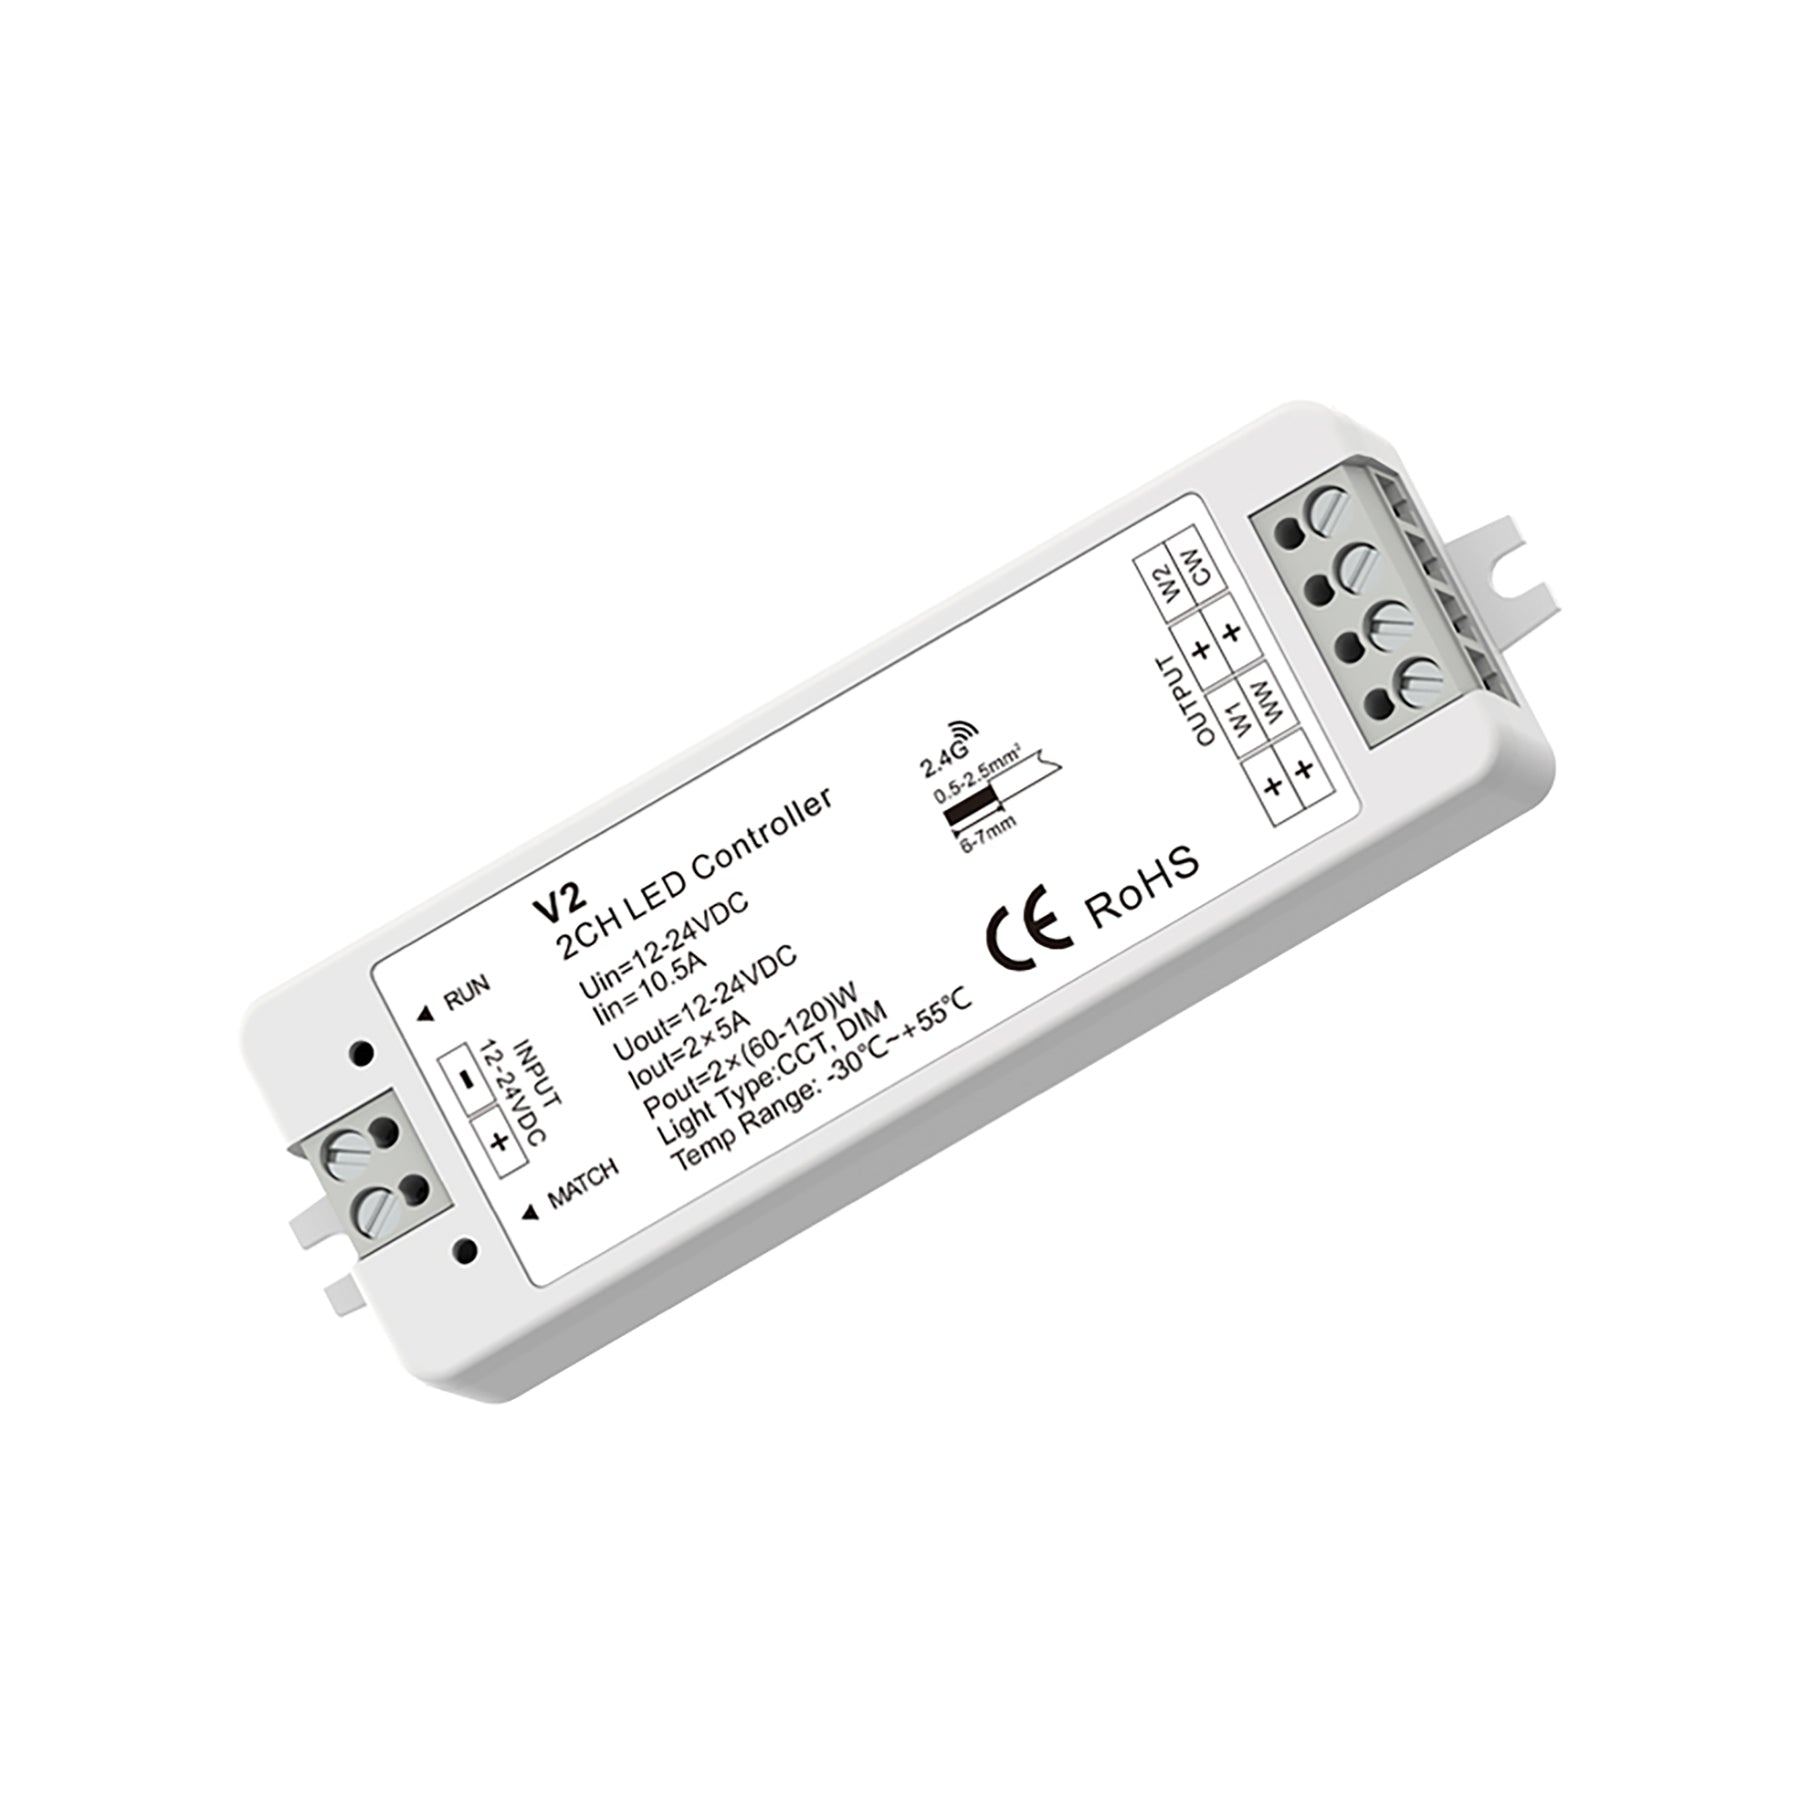 G.W.S. LED LED 12-24V DC CCT Controller V2 + 4 Zone Panel Remote Control 2*AAA Battery T22